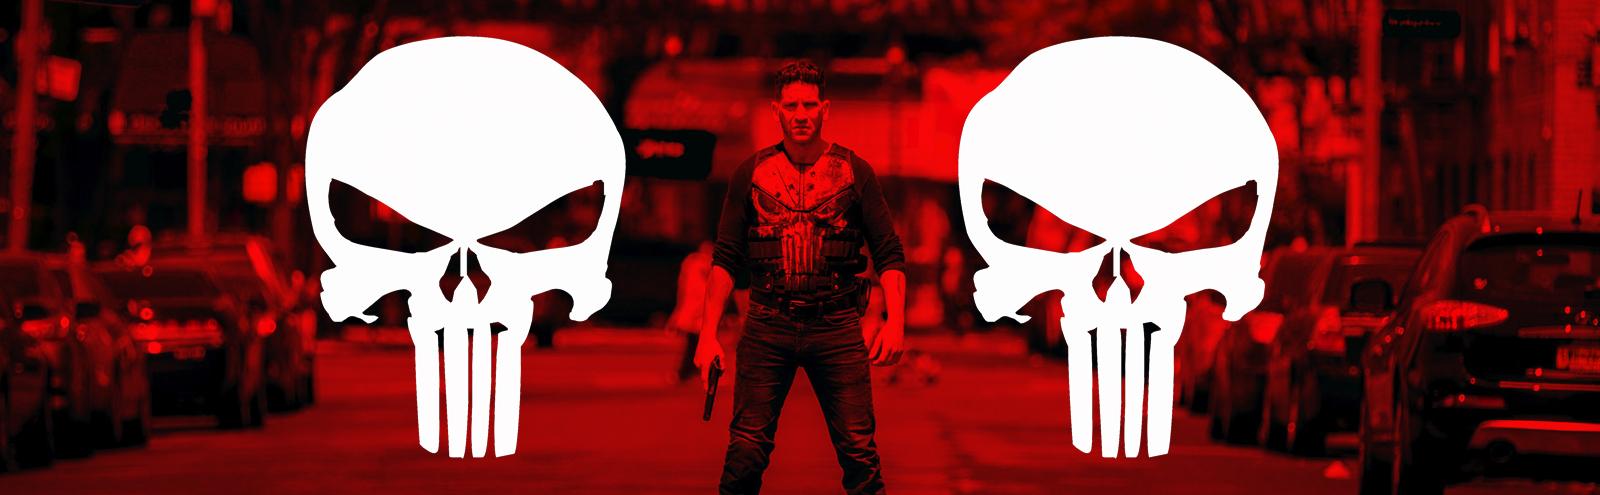 It's Time For Marvel To Put 'The Punisher' To Sleep